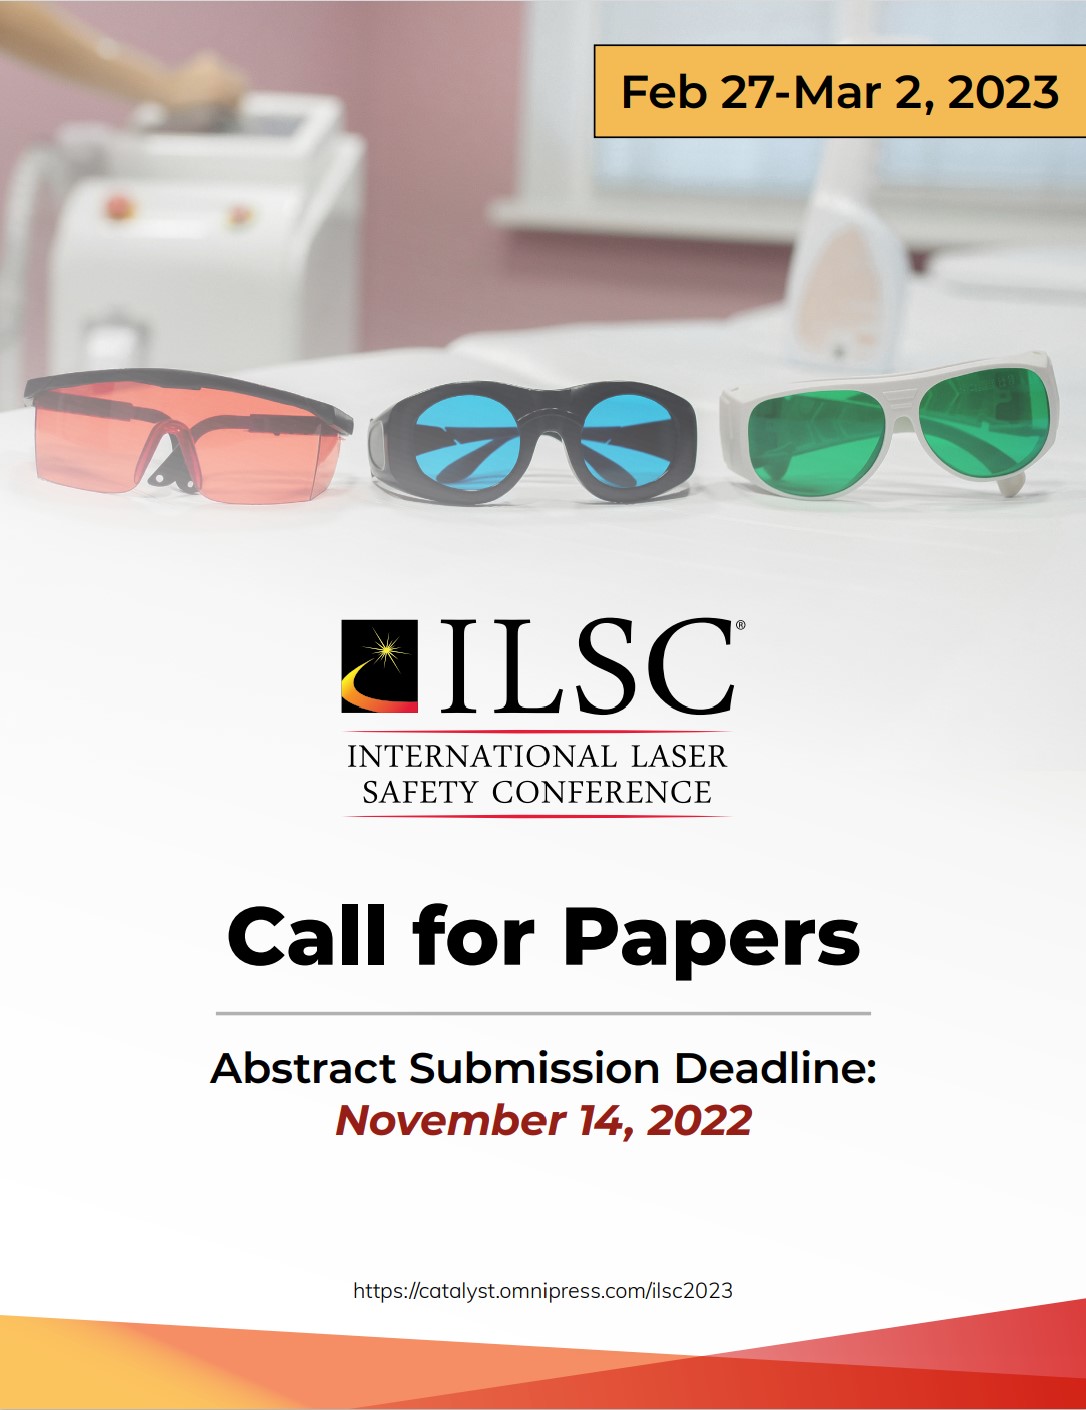 ILSC Call for Papers